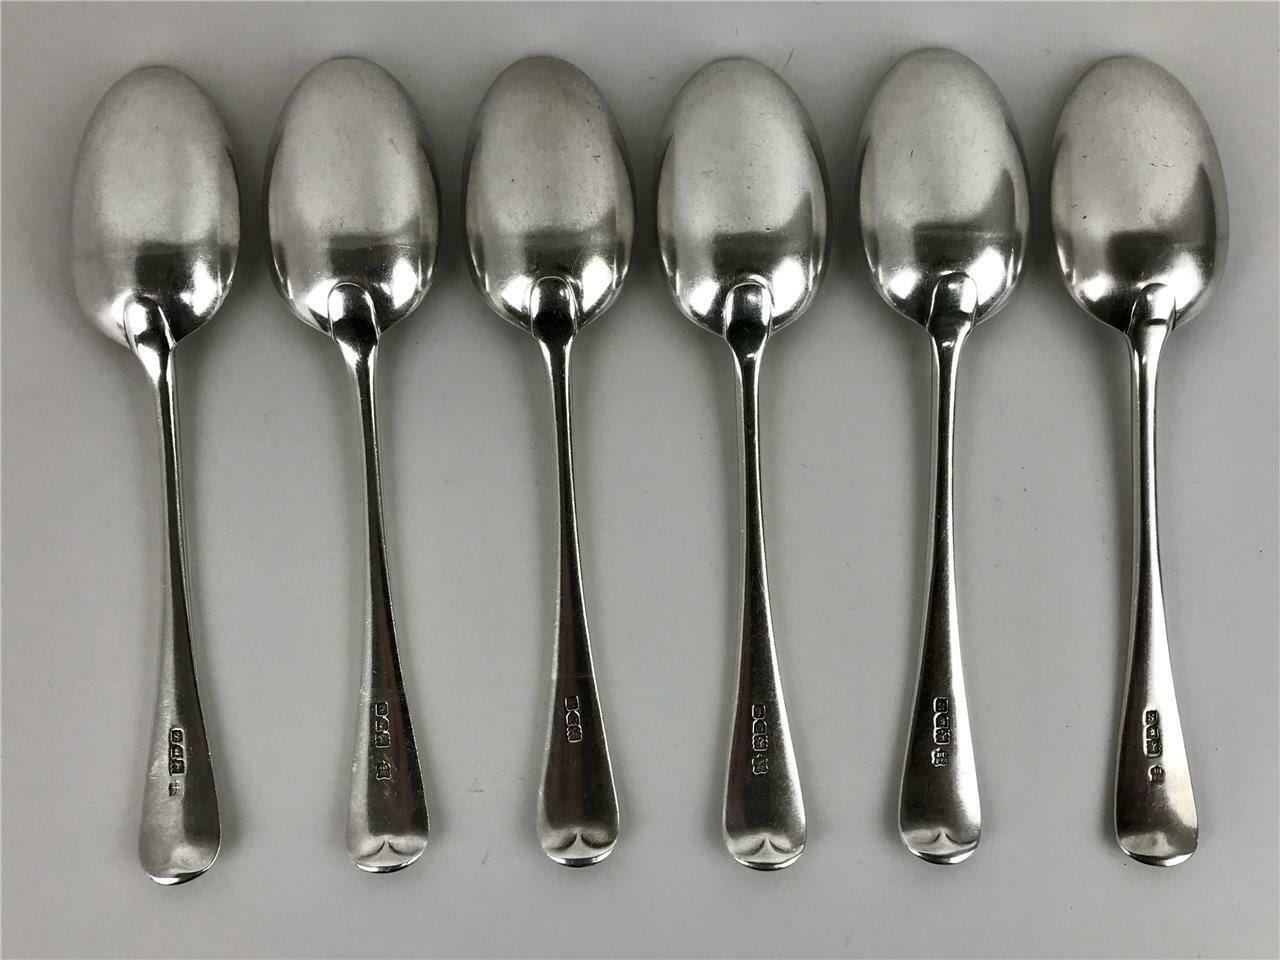 https://riantiquesmall.com/wp-content/uploads/imported/7/Antique-GEORGE-JACKSON-DAVID-FULLERTON-London-Sterling-Silver-set-6-Table-Spoons-183794284227-2.JPG